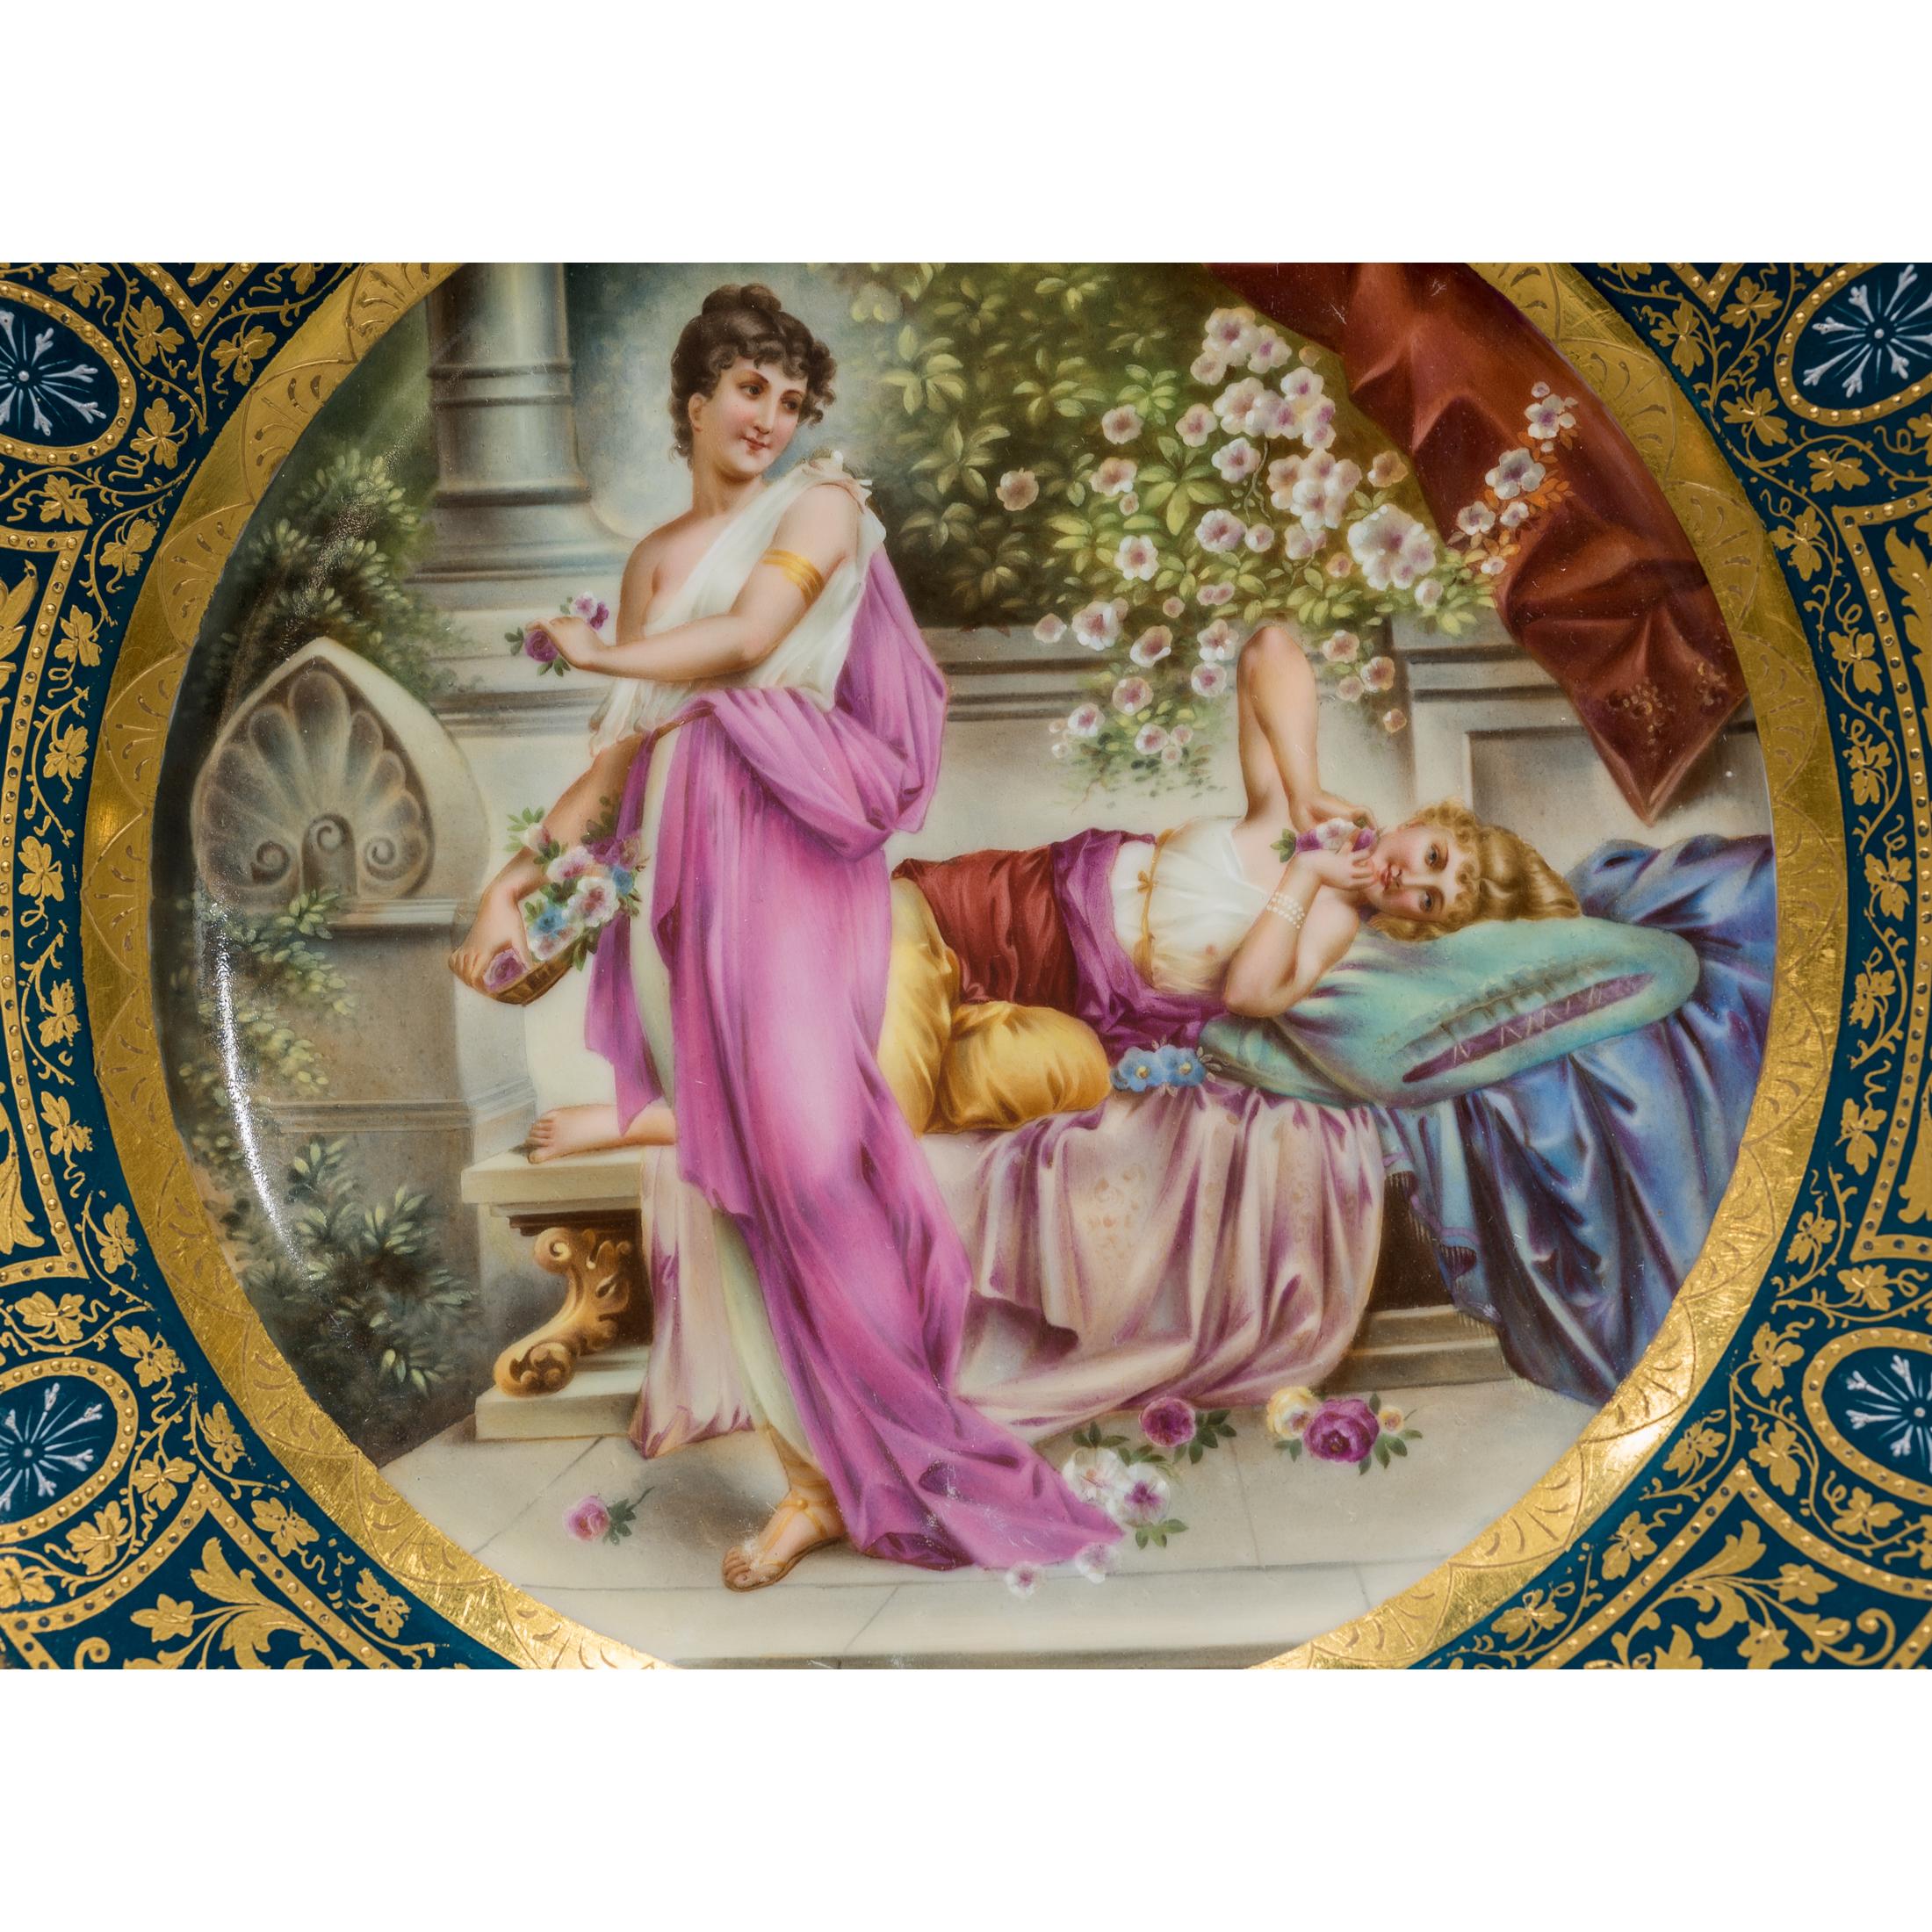 Exquisite Royal Vienna portrait porcelain gilded cabinet plate featuring hand-painted illustrations of two beautiful young neoclassical women lounging in a garden. The cobalt blue border is finished with gold trim of grape vines, with leaflike